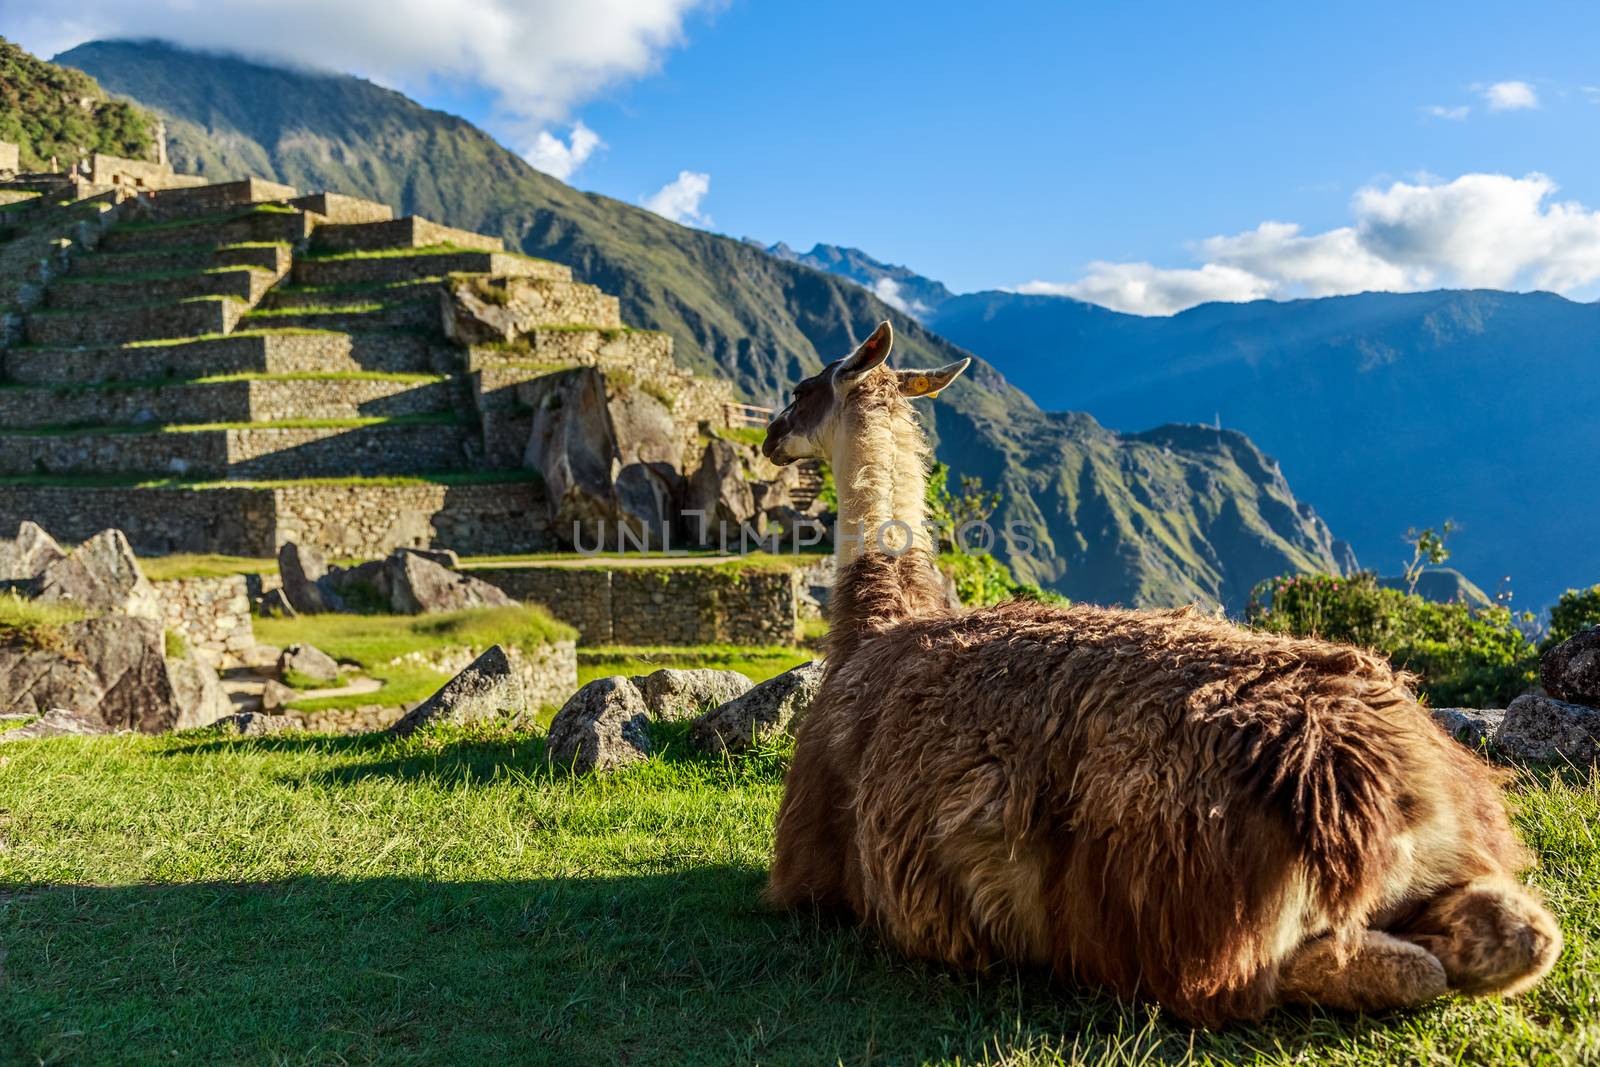 Lama sitting on the grass and looking at terrace of Machu Picchu by ambeon